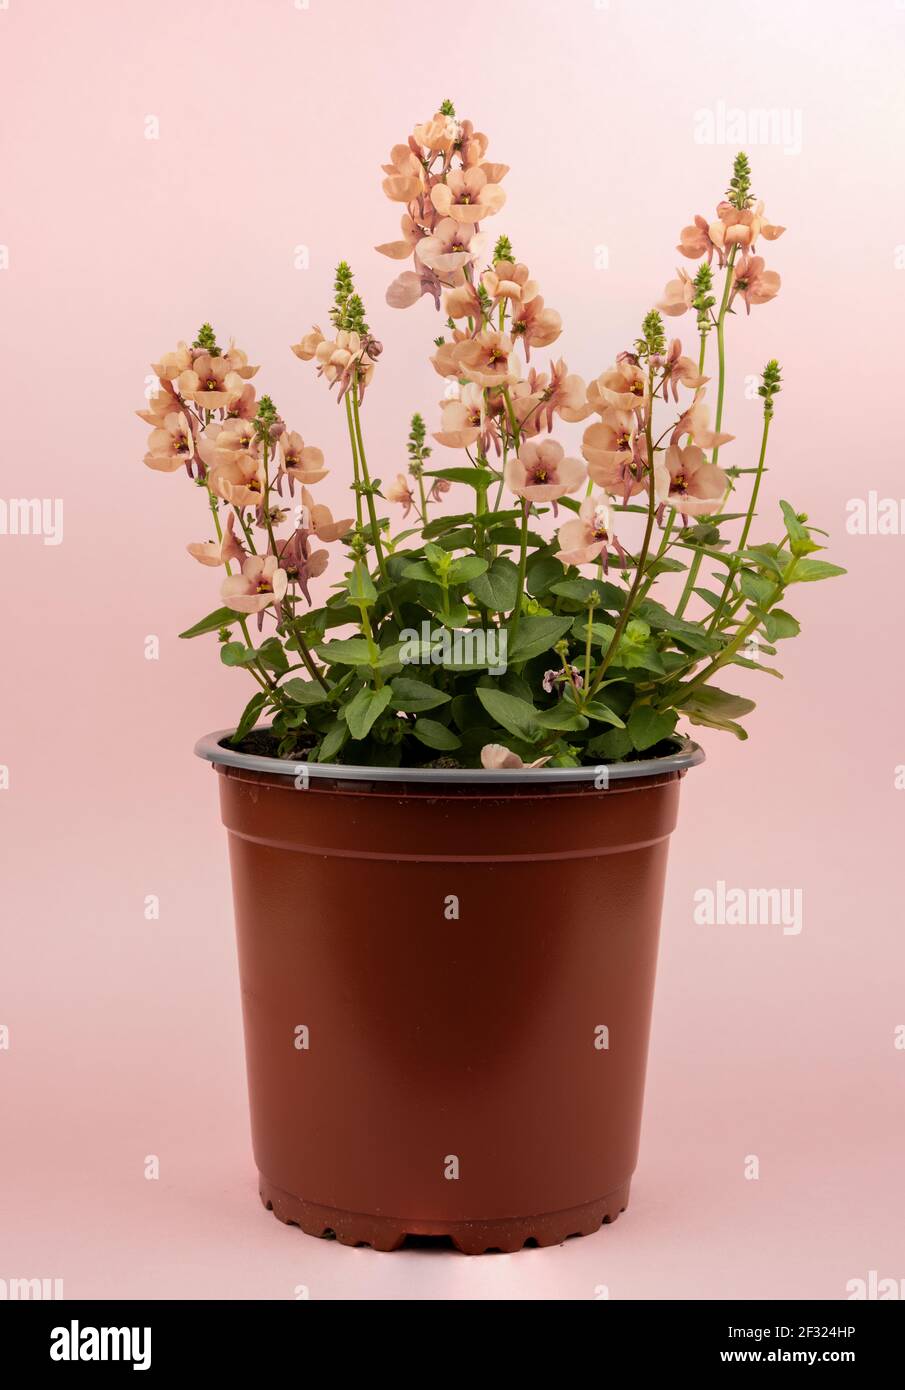 diascia rigescens in pot with pink background Stock Photo